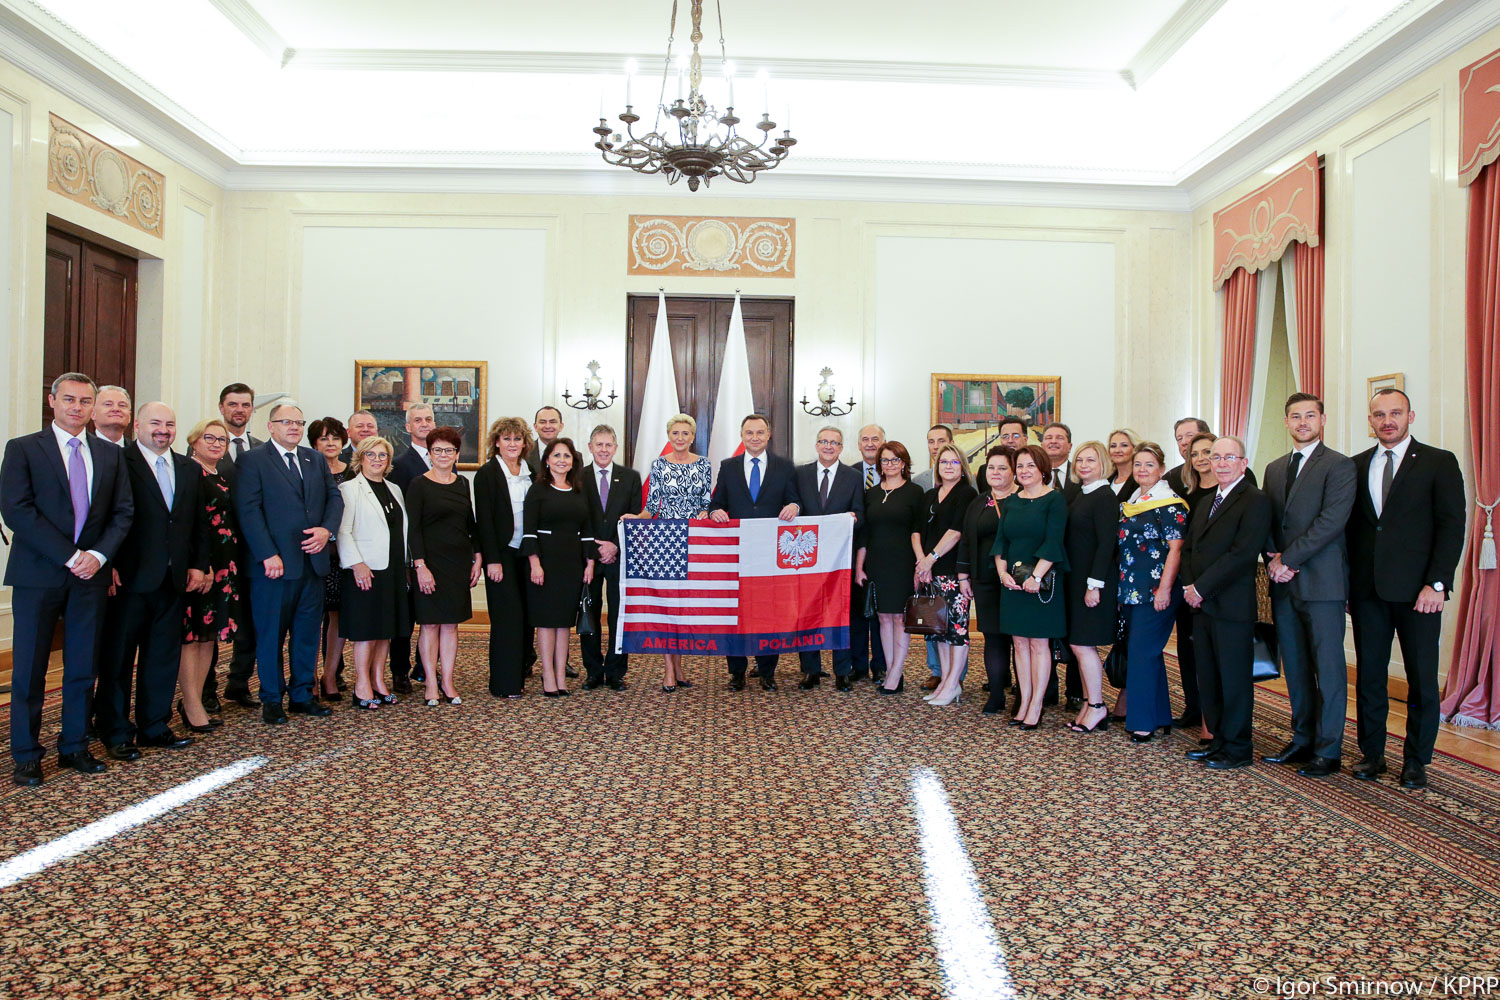 PSFCU at the Presidential Palace in Warsaw